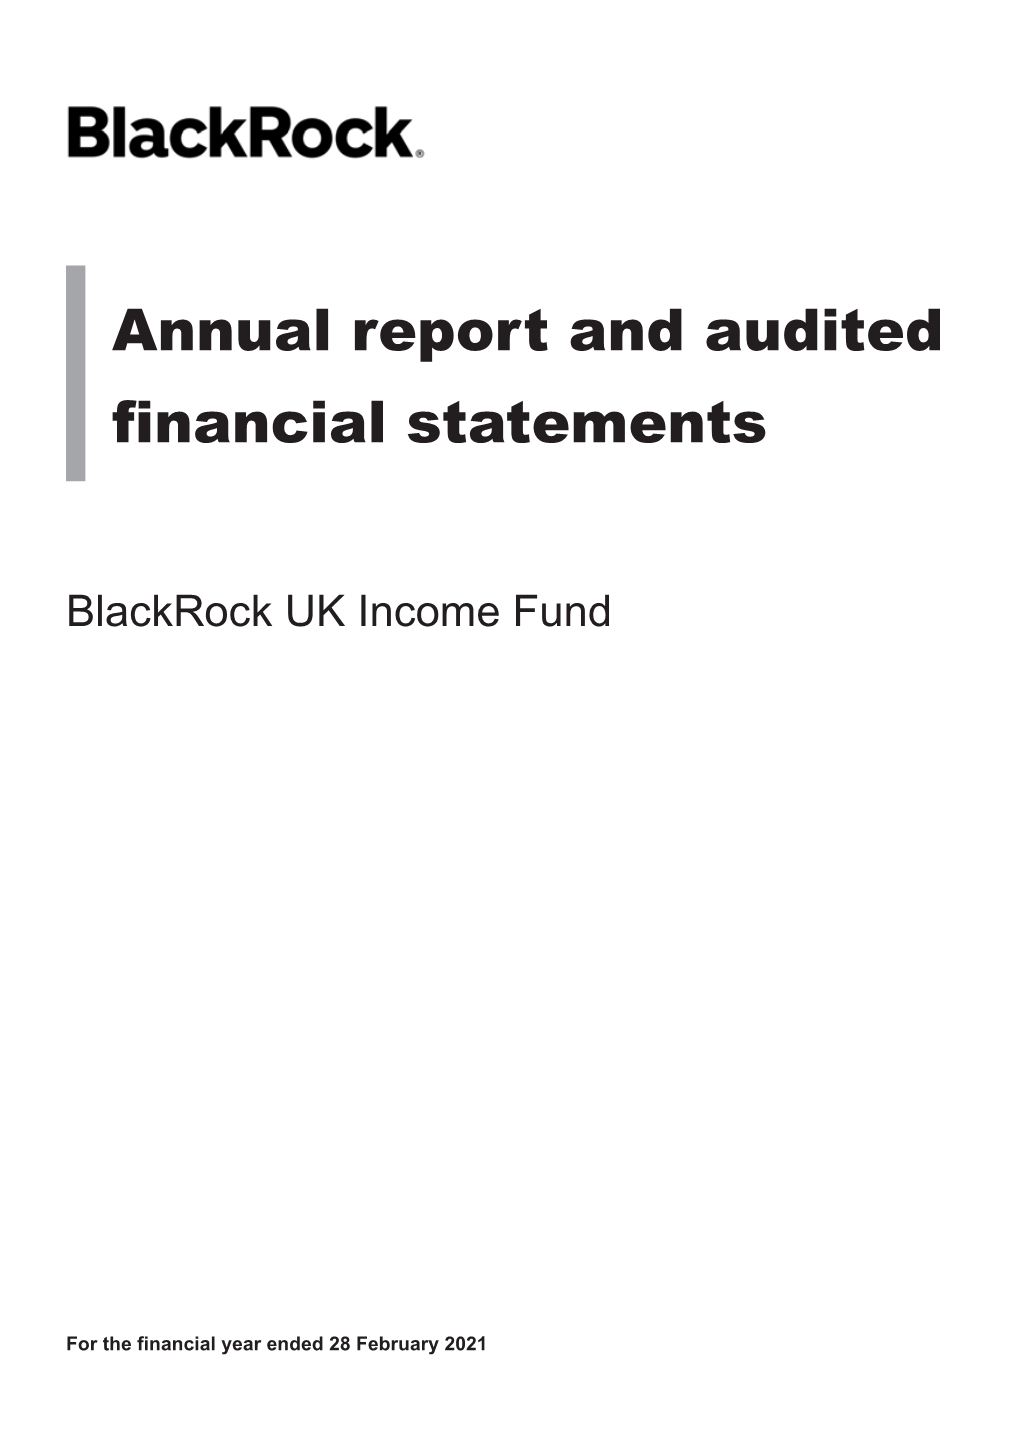 Annual Report and Audited Financial Statements